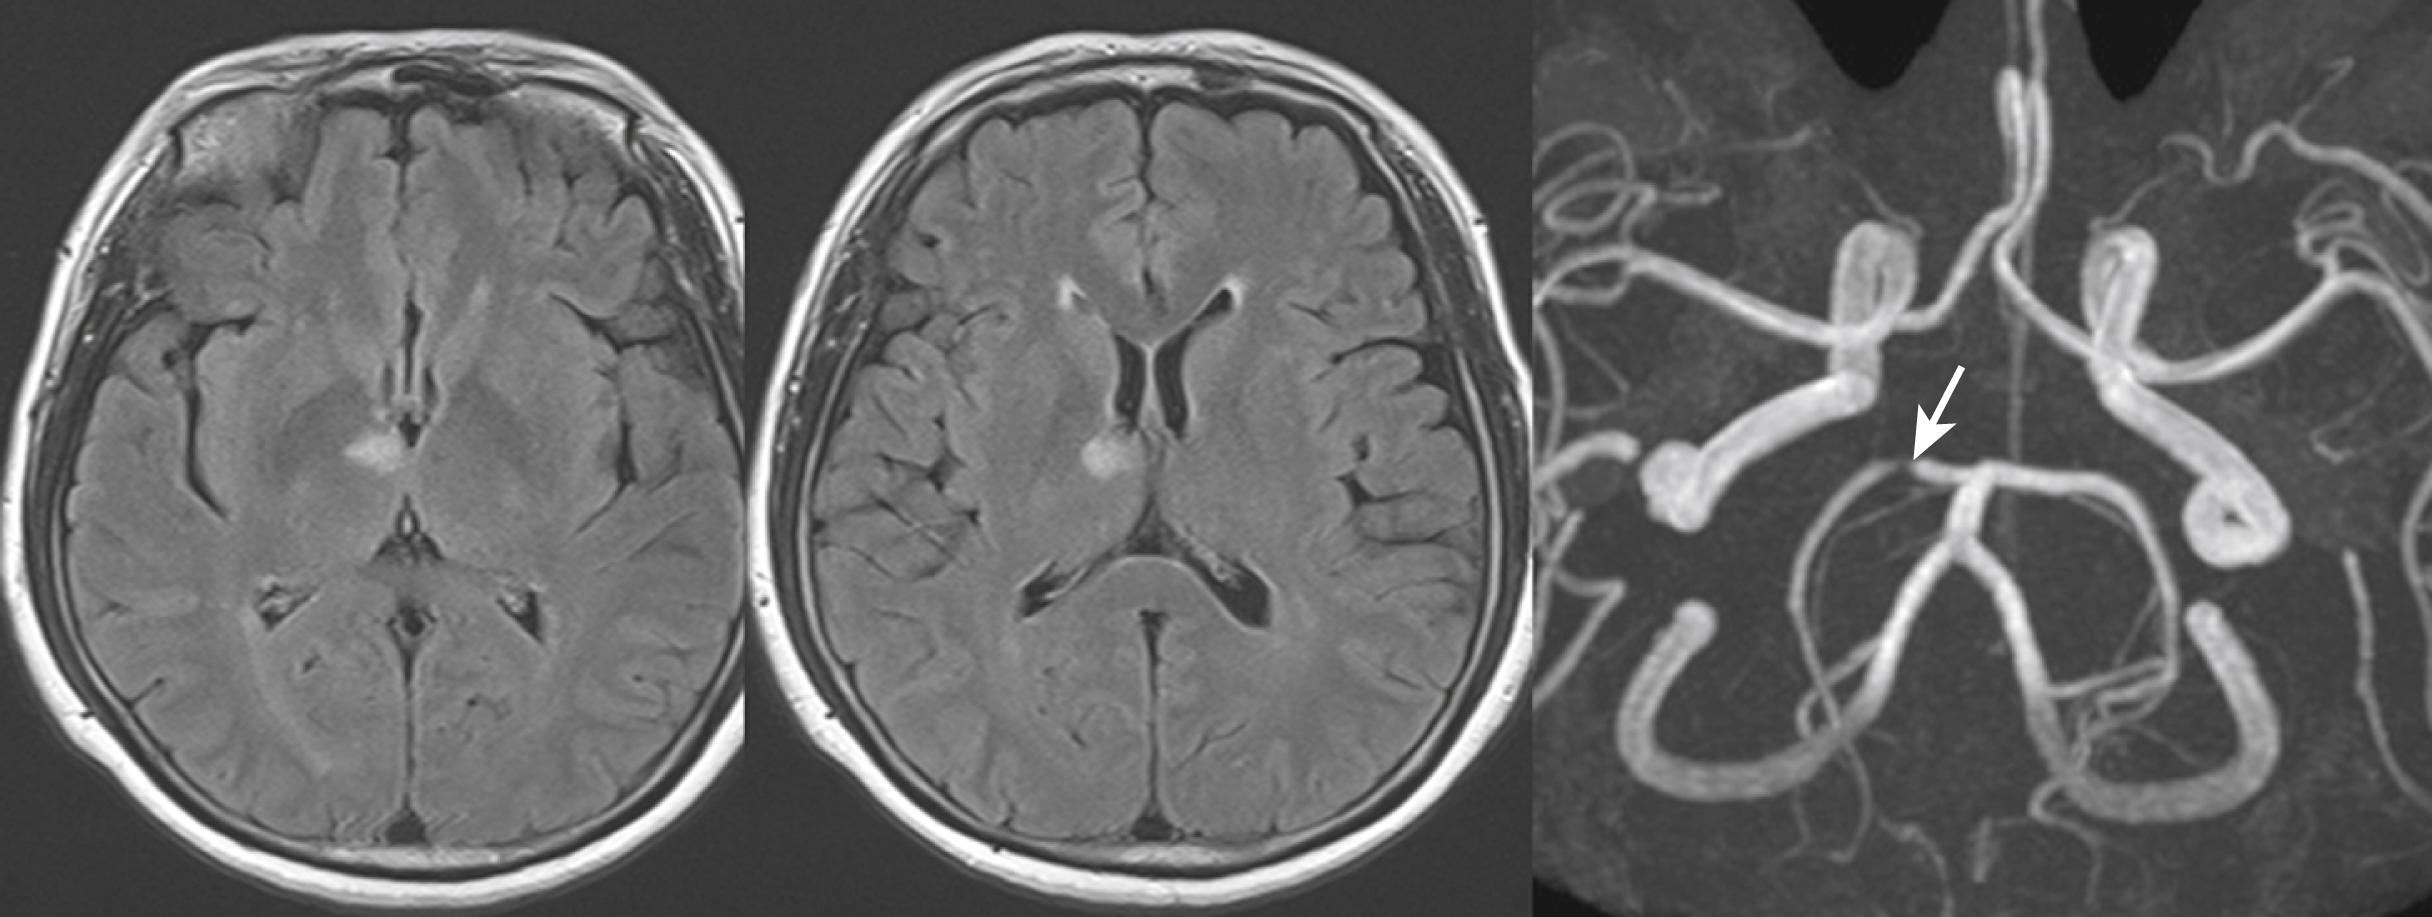 Fig. 25.7, A 56-year-old hypertensive woman suddenly had memory loss. Examination showed severe anterograde amnesia. Flair MRI showed right anterior thalamic infarct (first two images) . MR angiogram showed focal stenosis in the P1 portion of the right posterior cerebral artery (arrow) that probably produced branch occlusion (occlusion of the paramedian artery). Posterior communicating artery was not visible.